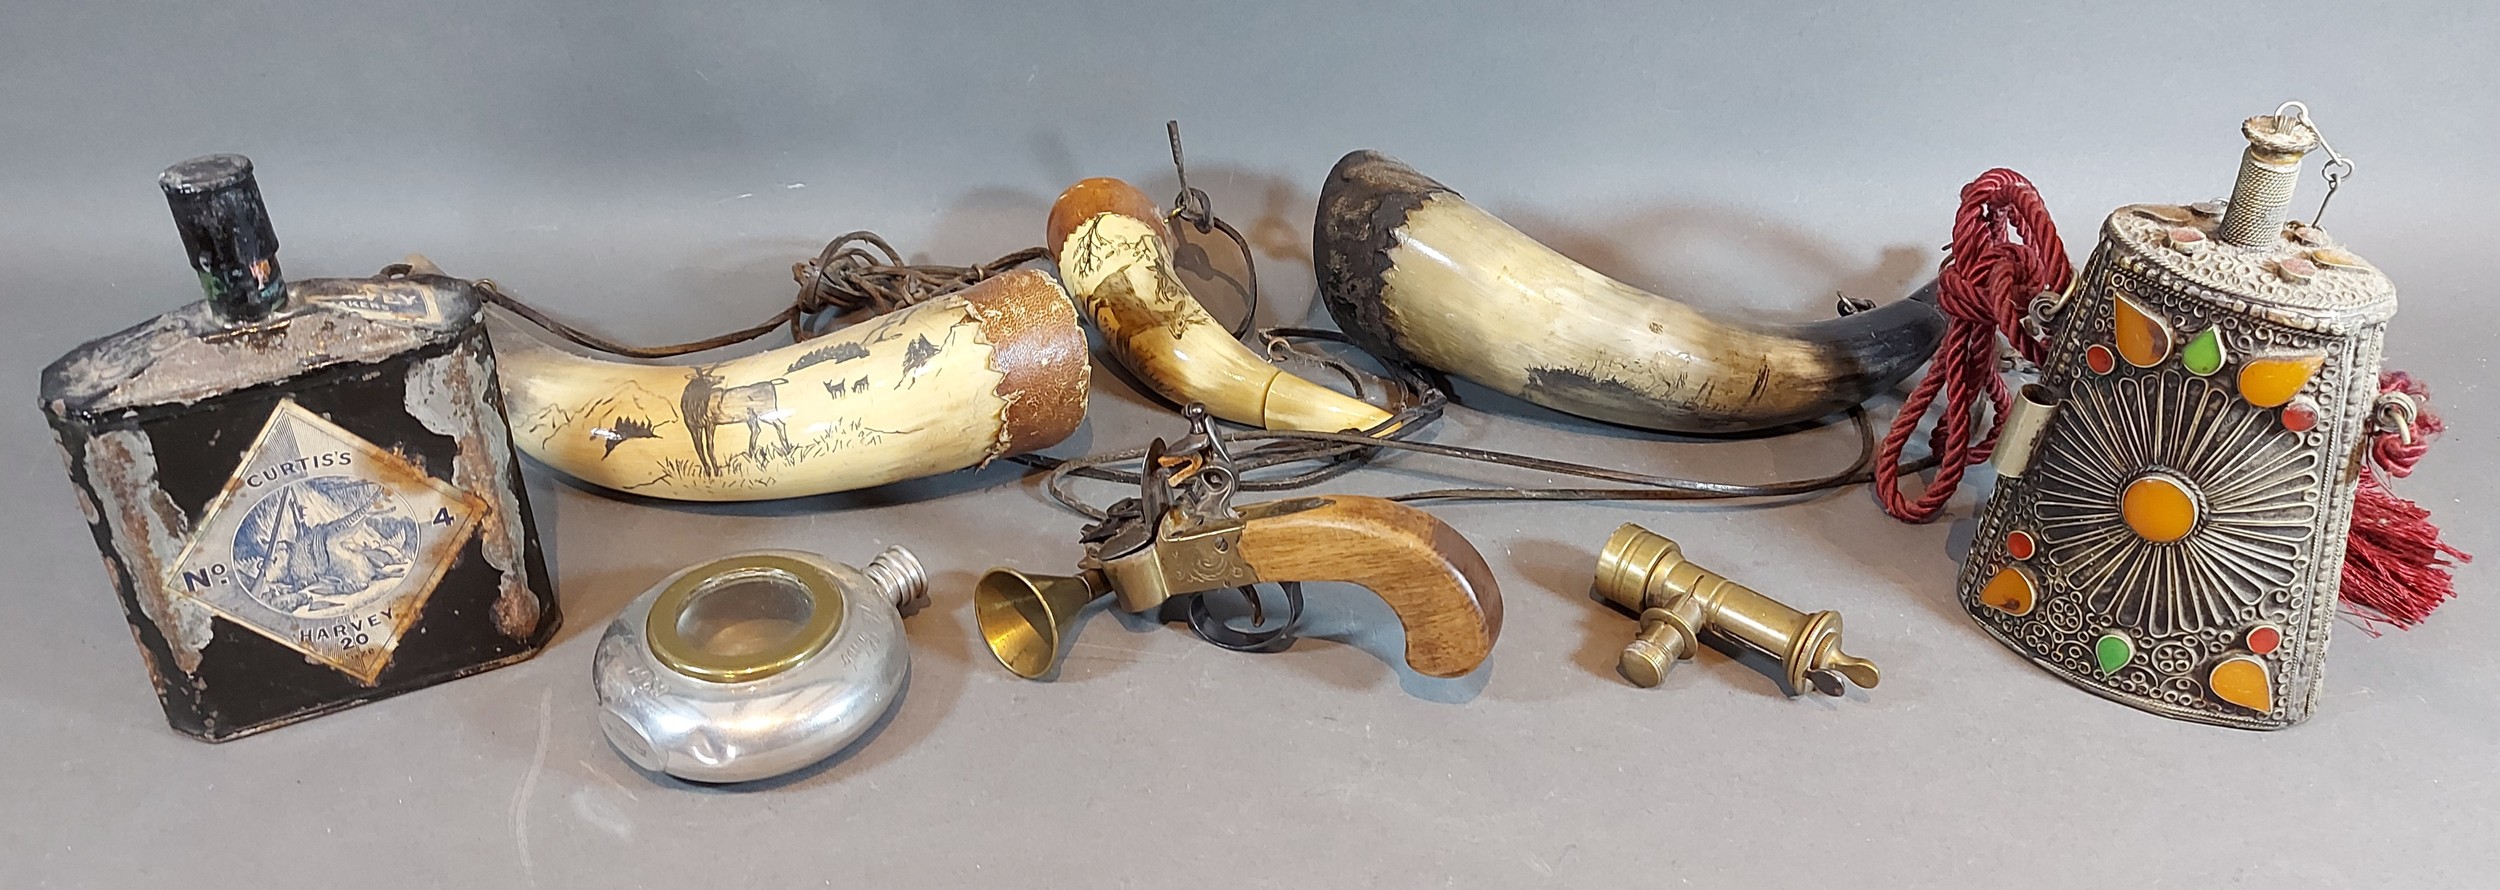 A Flintlock Tinderbox together with four powder flasks and other related items